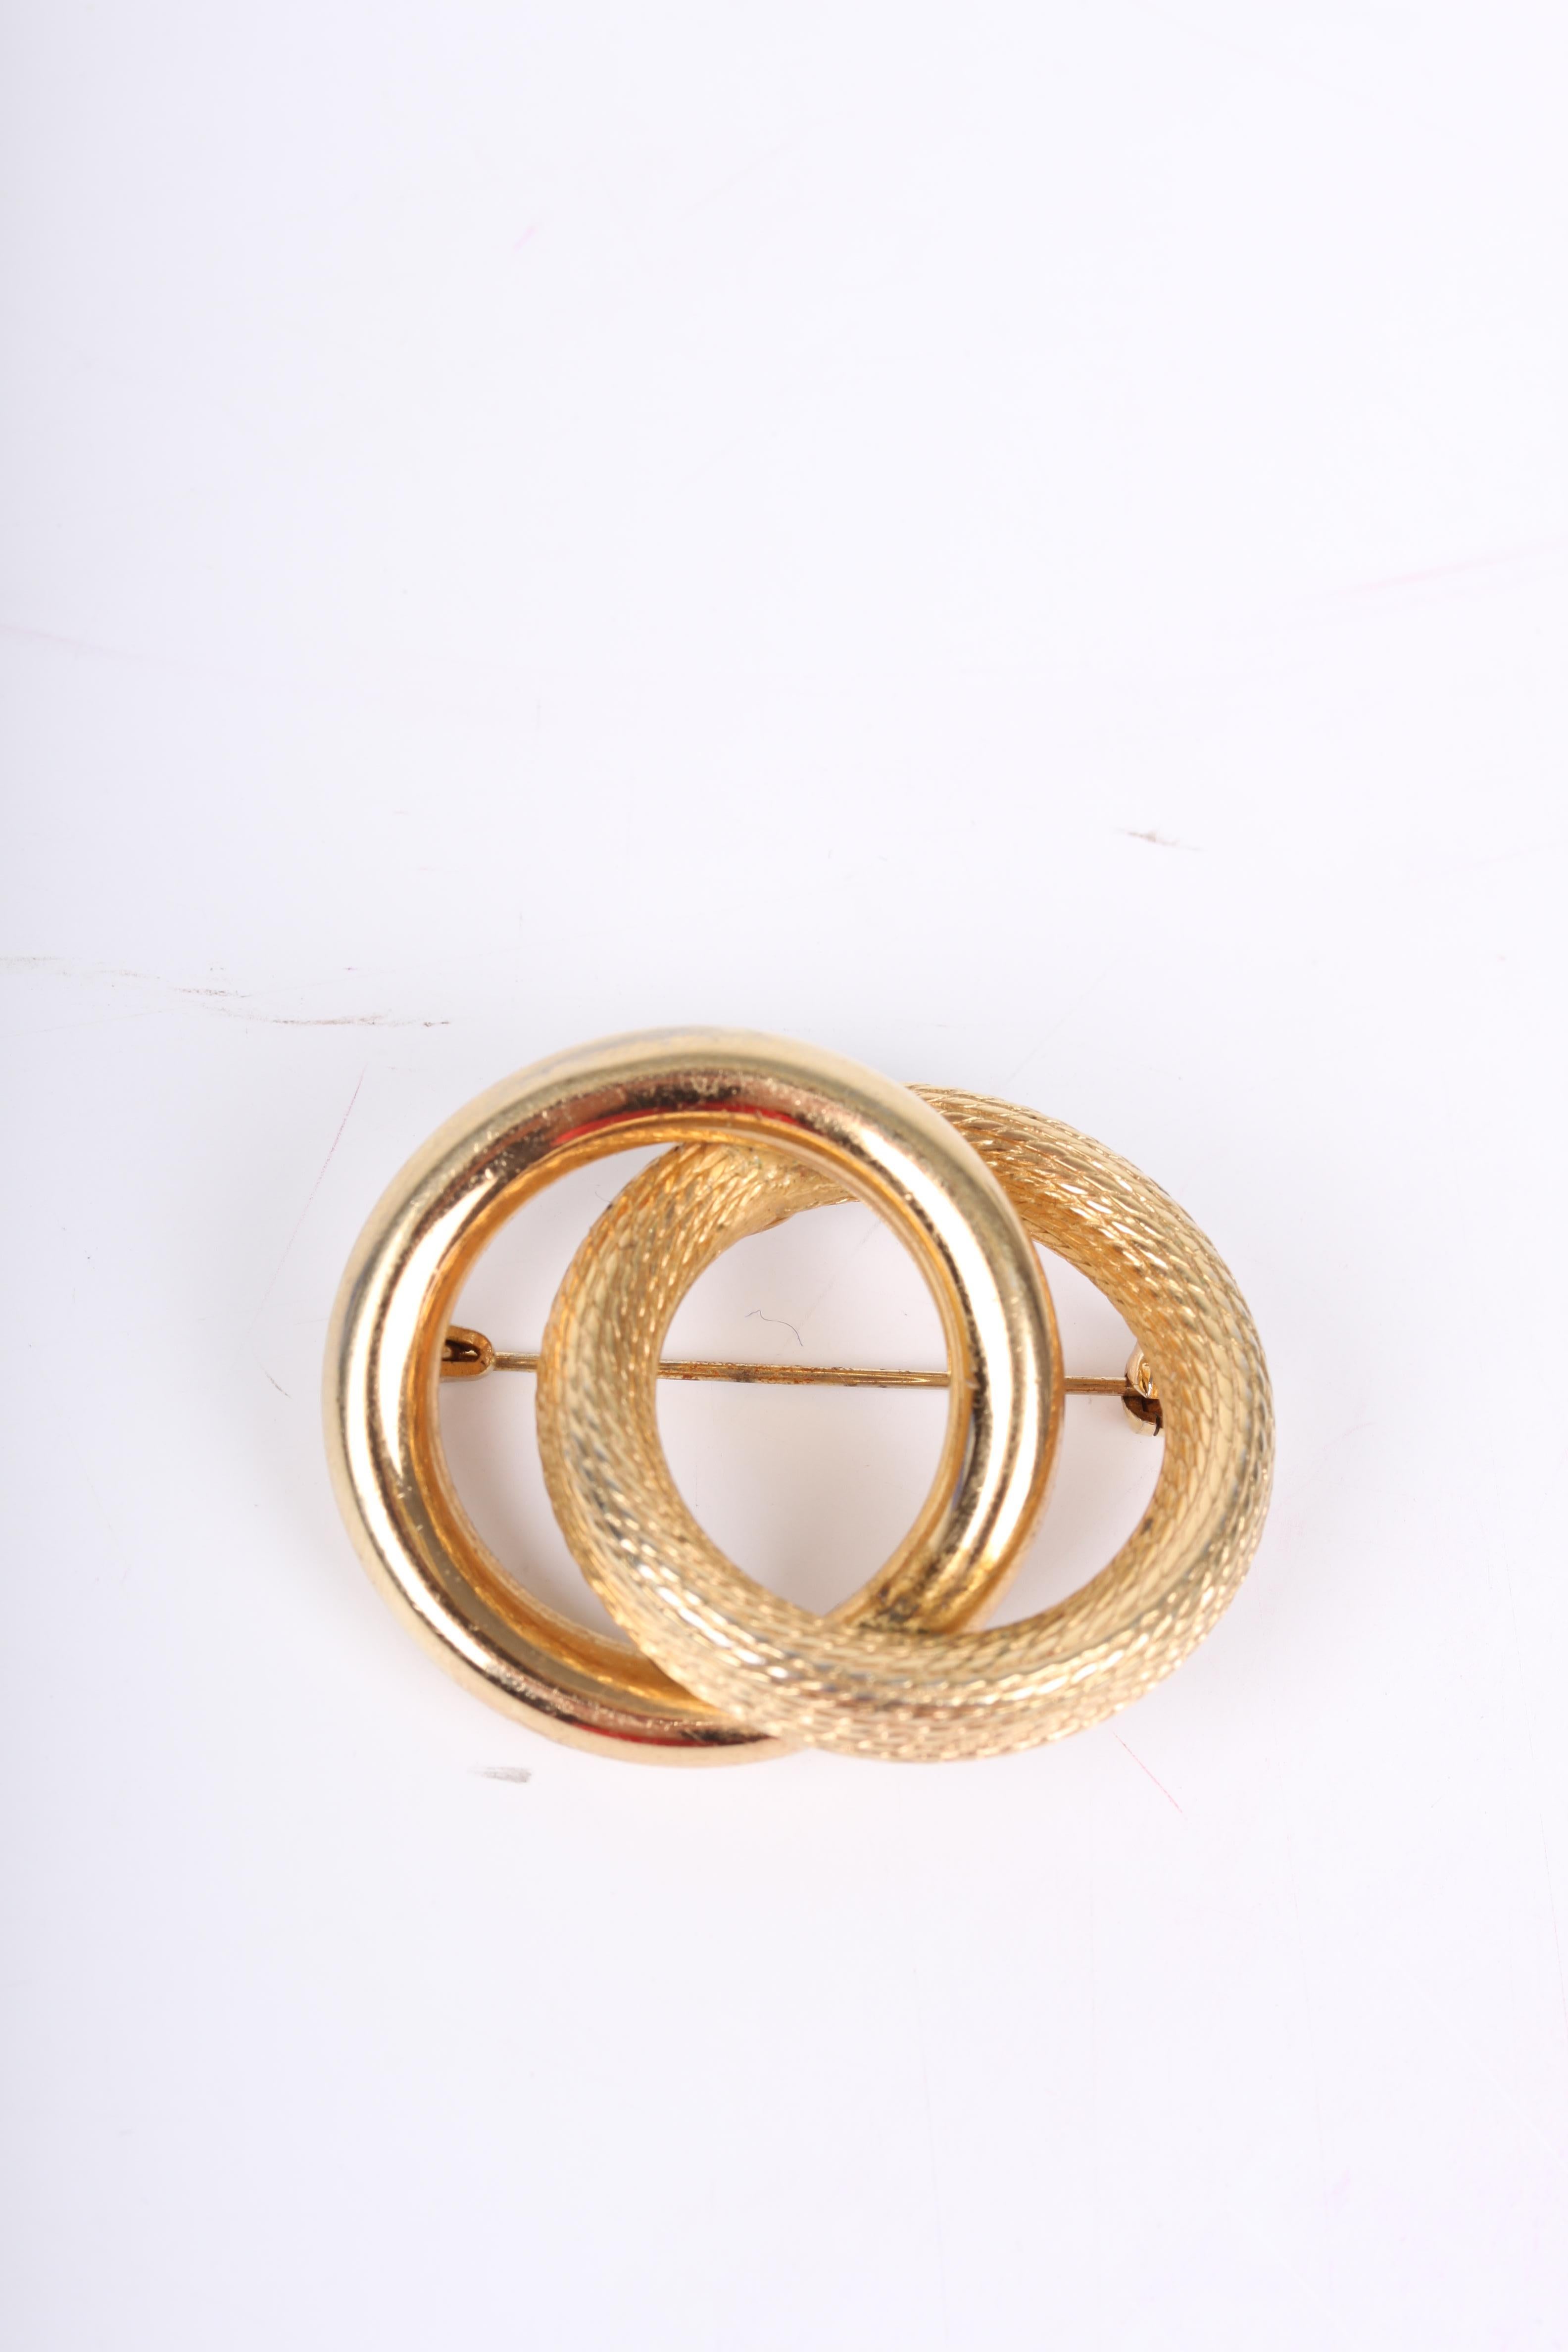 Very old vintage gold-plated Christian Dior brooch. Nice!

The brooch holds two large gold-tone rings; one with a snake skin pattern, the other one smooth. On the back of course a pin, the Christian Dior logo and the year 1958!

Measurements: 4,3 x